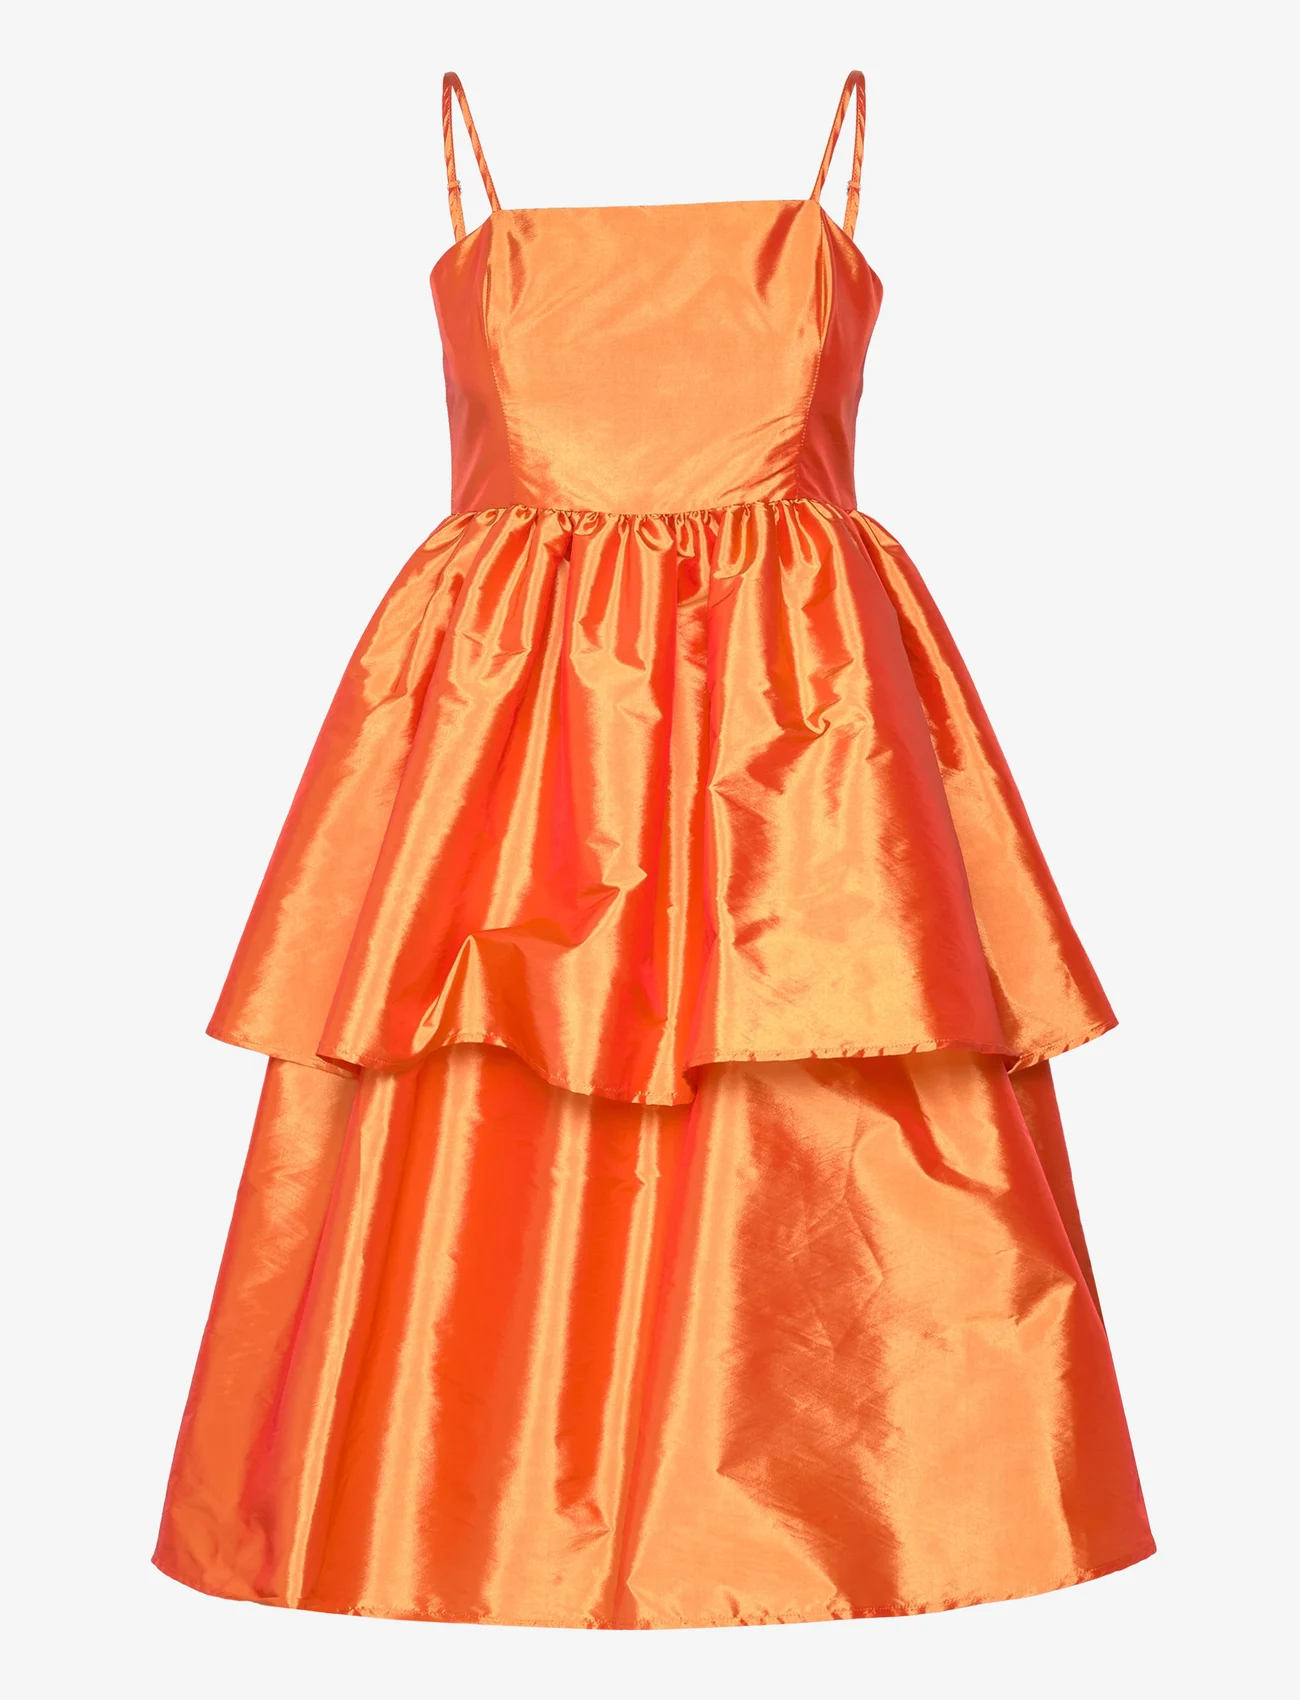 bzr - Tafetta Dream dress - party wear at outlet prices - orange flame - 0